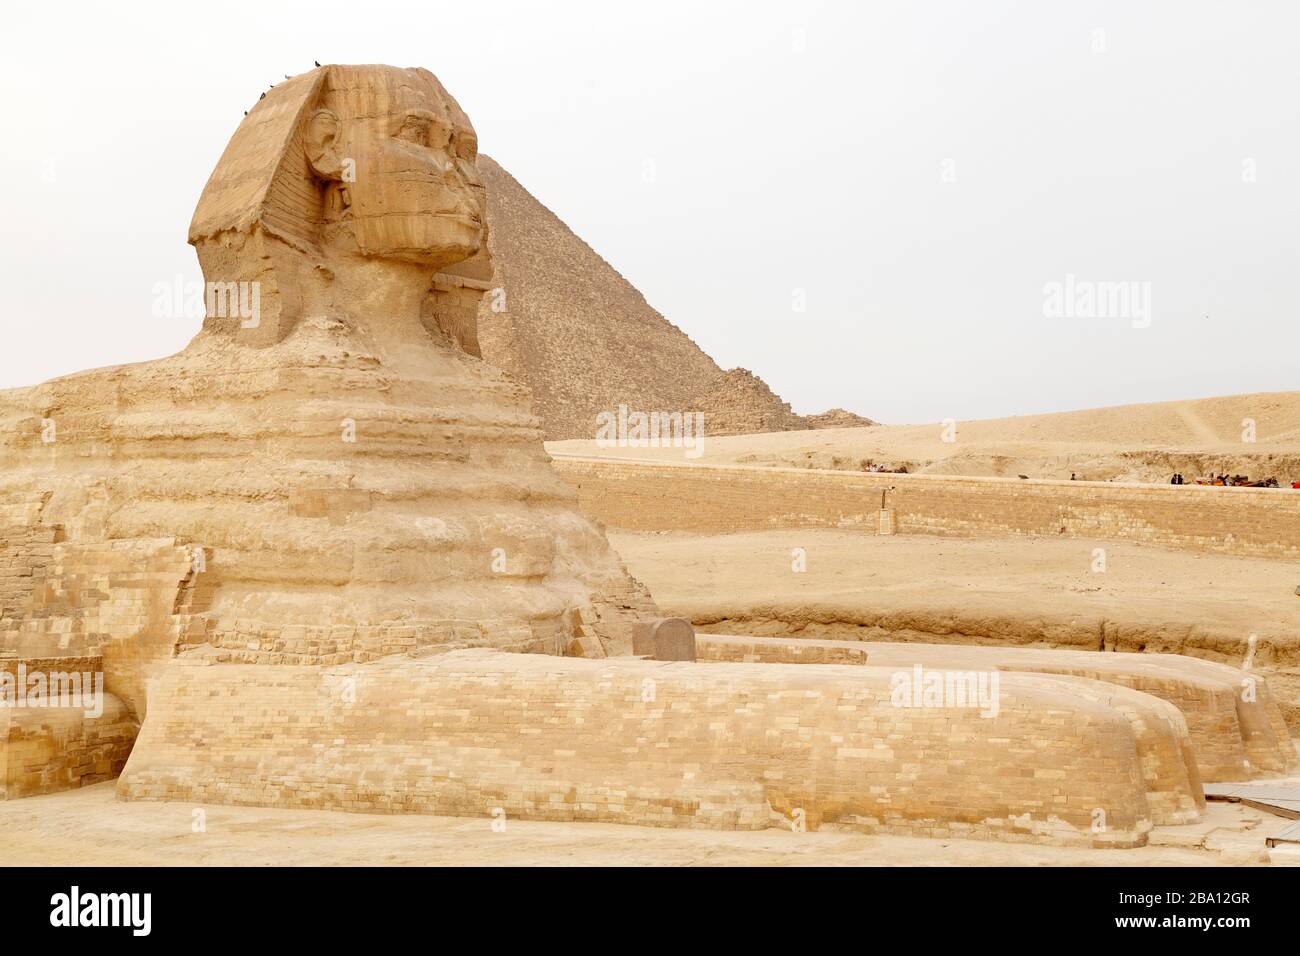 The Great Sphinx of Giza, by the Great Pyramid of Khufu, at the Giza Plateau in Cairo, Egypt. The sphinx is thought to be more than 4,500 years old. Stock Photo